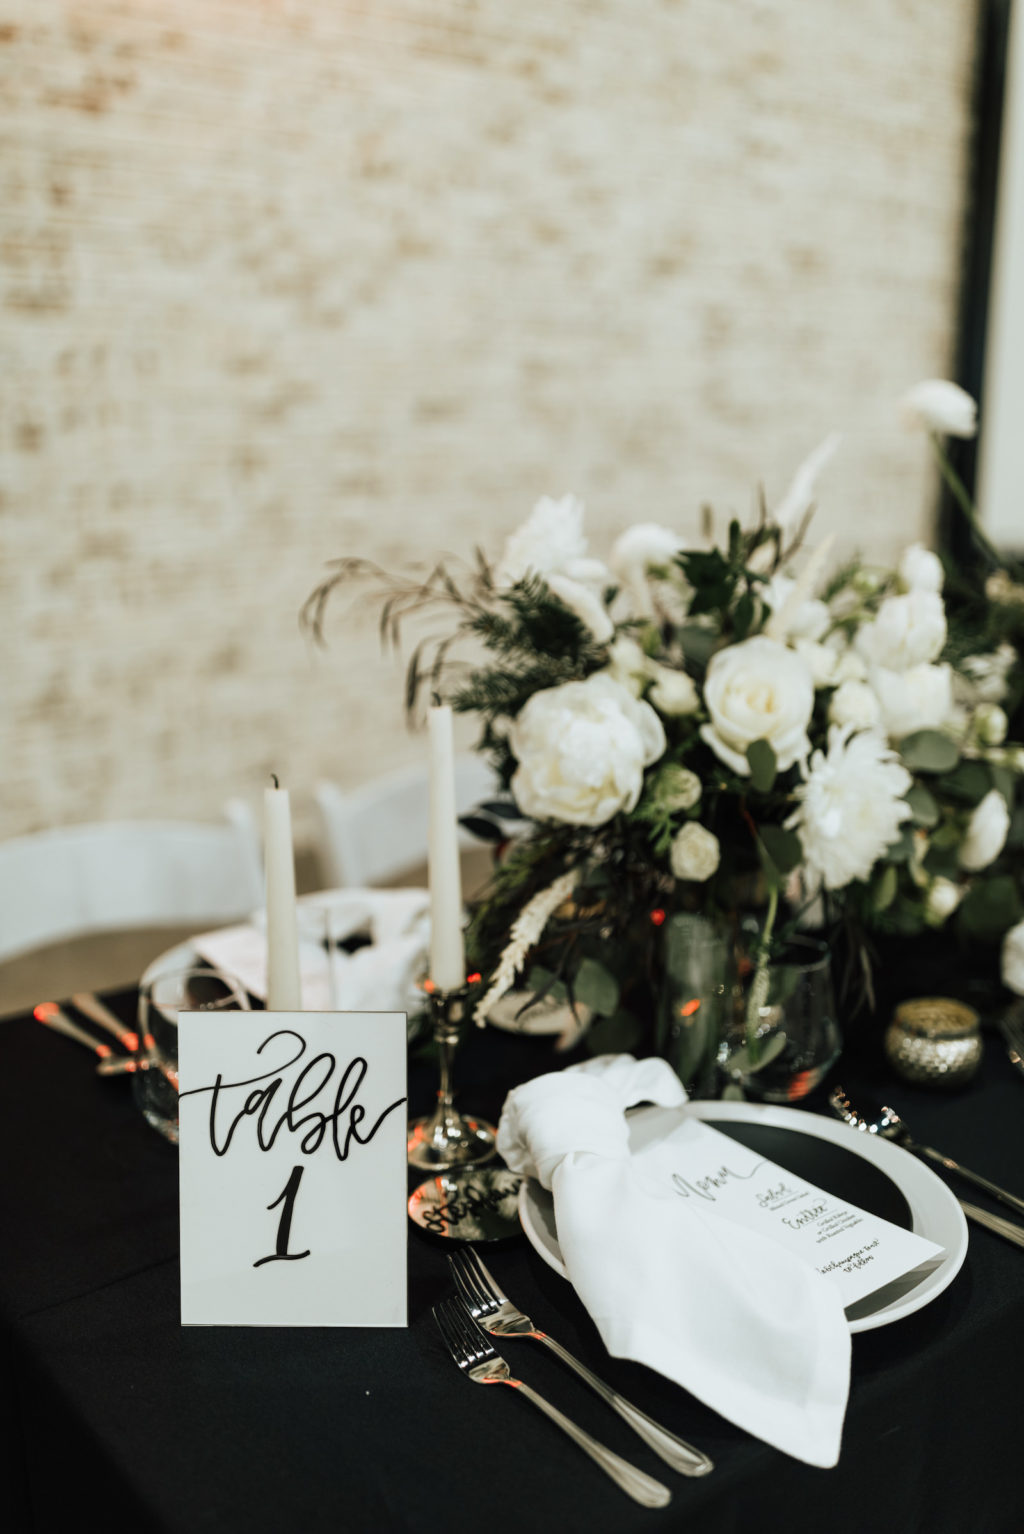 Black and White Winter Florida Modern Industrial Wedding Reception Table Inspiration | Black Table Linen with Black and White China Plates, White Napkins, Taper Candles, and Floral Centerpieces of White Roses and Winter Pine Greenery | Black and White Calligraphy Table Number Card